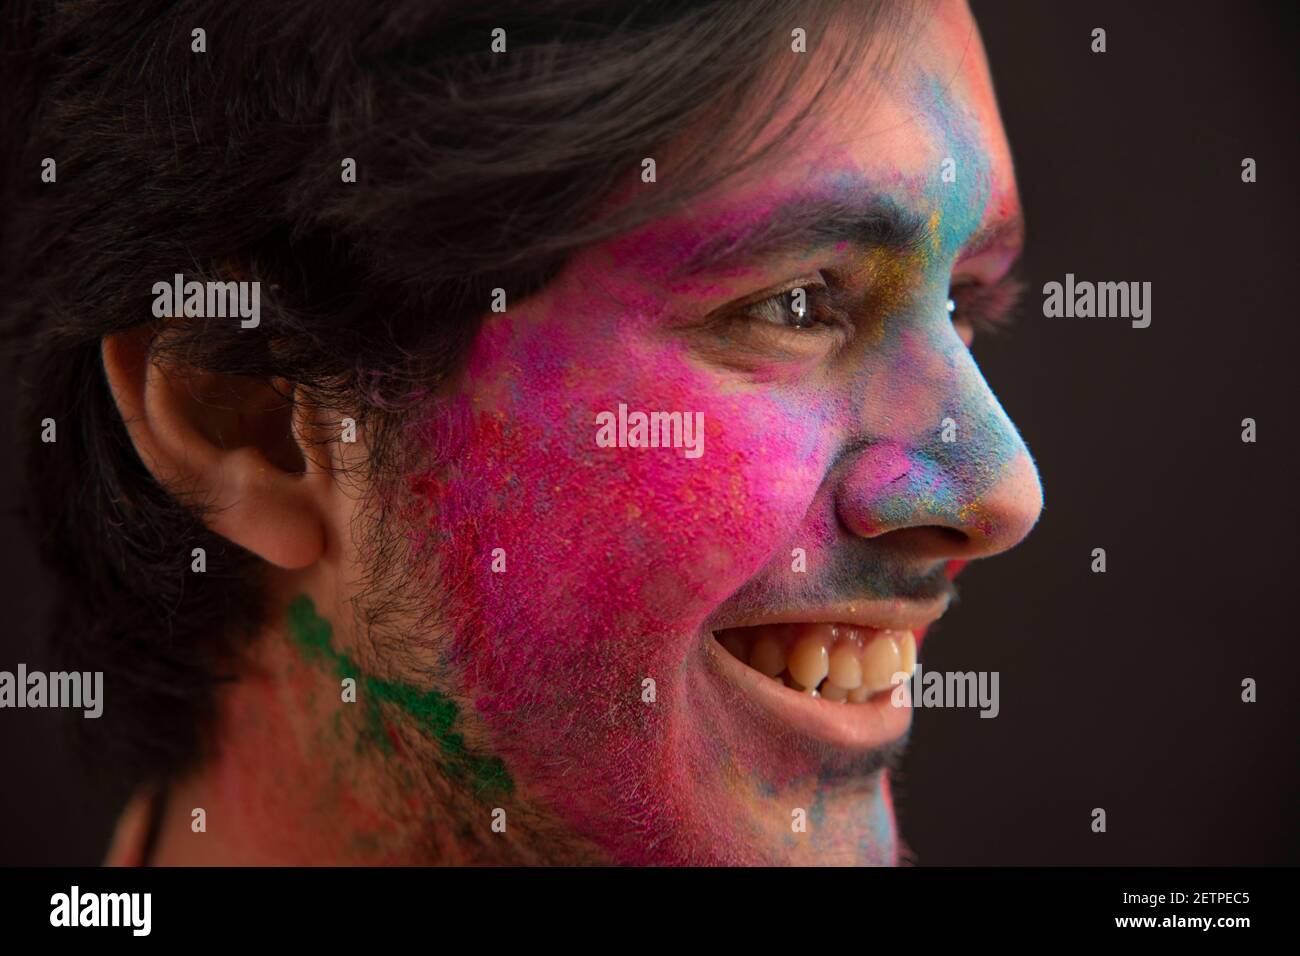 PORTRAIT OF A YOUNG MAN WITH GULAL ON HIS FACE SMILING Stock Photo